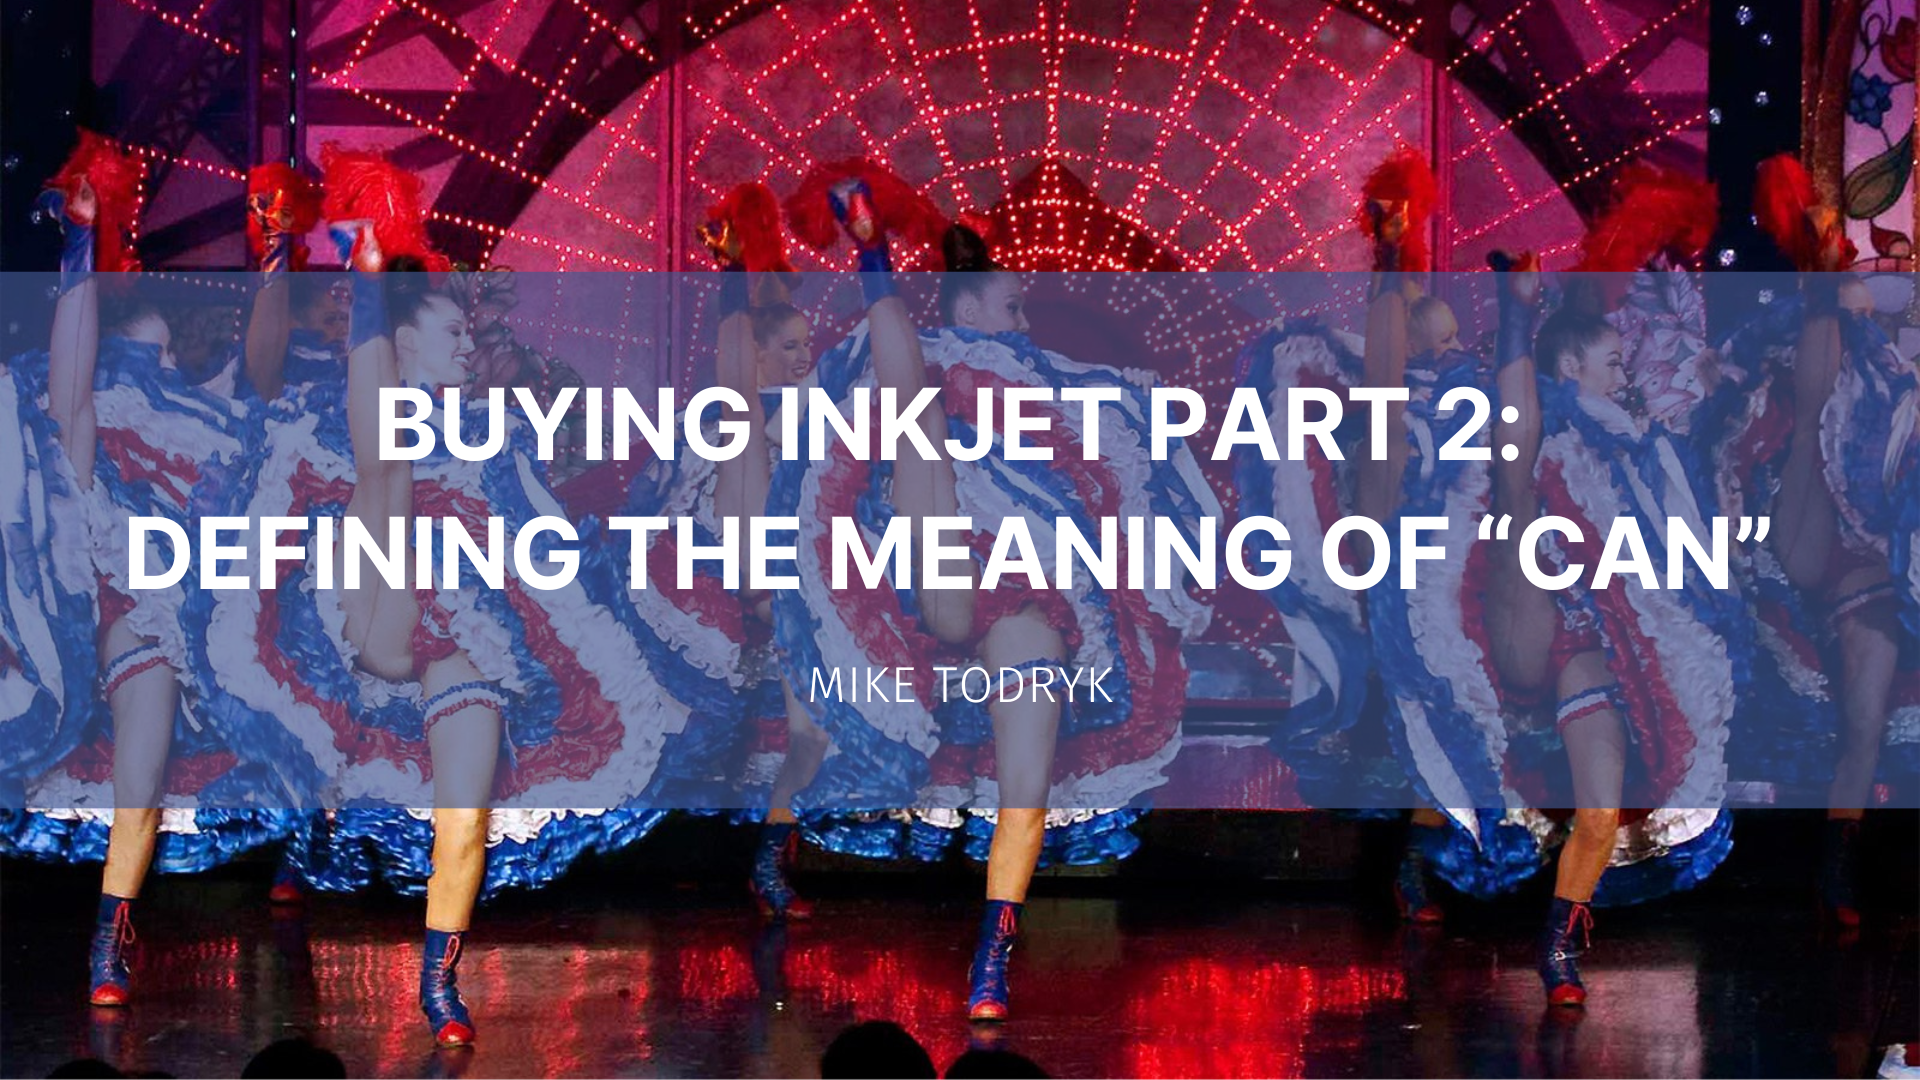 Featured image for “Buying Inkjet Part 2: Defining the Meaning of “Can””